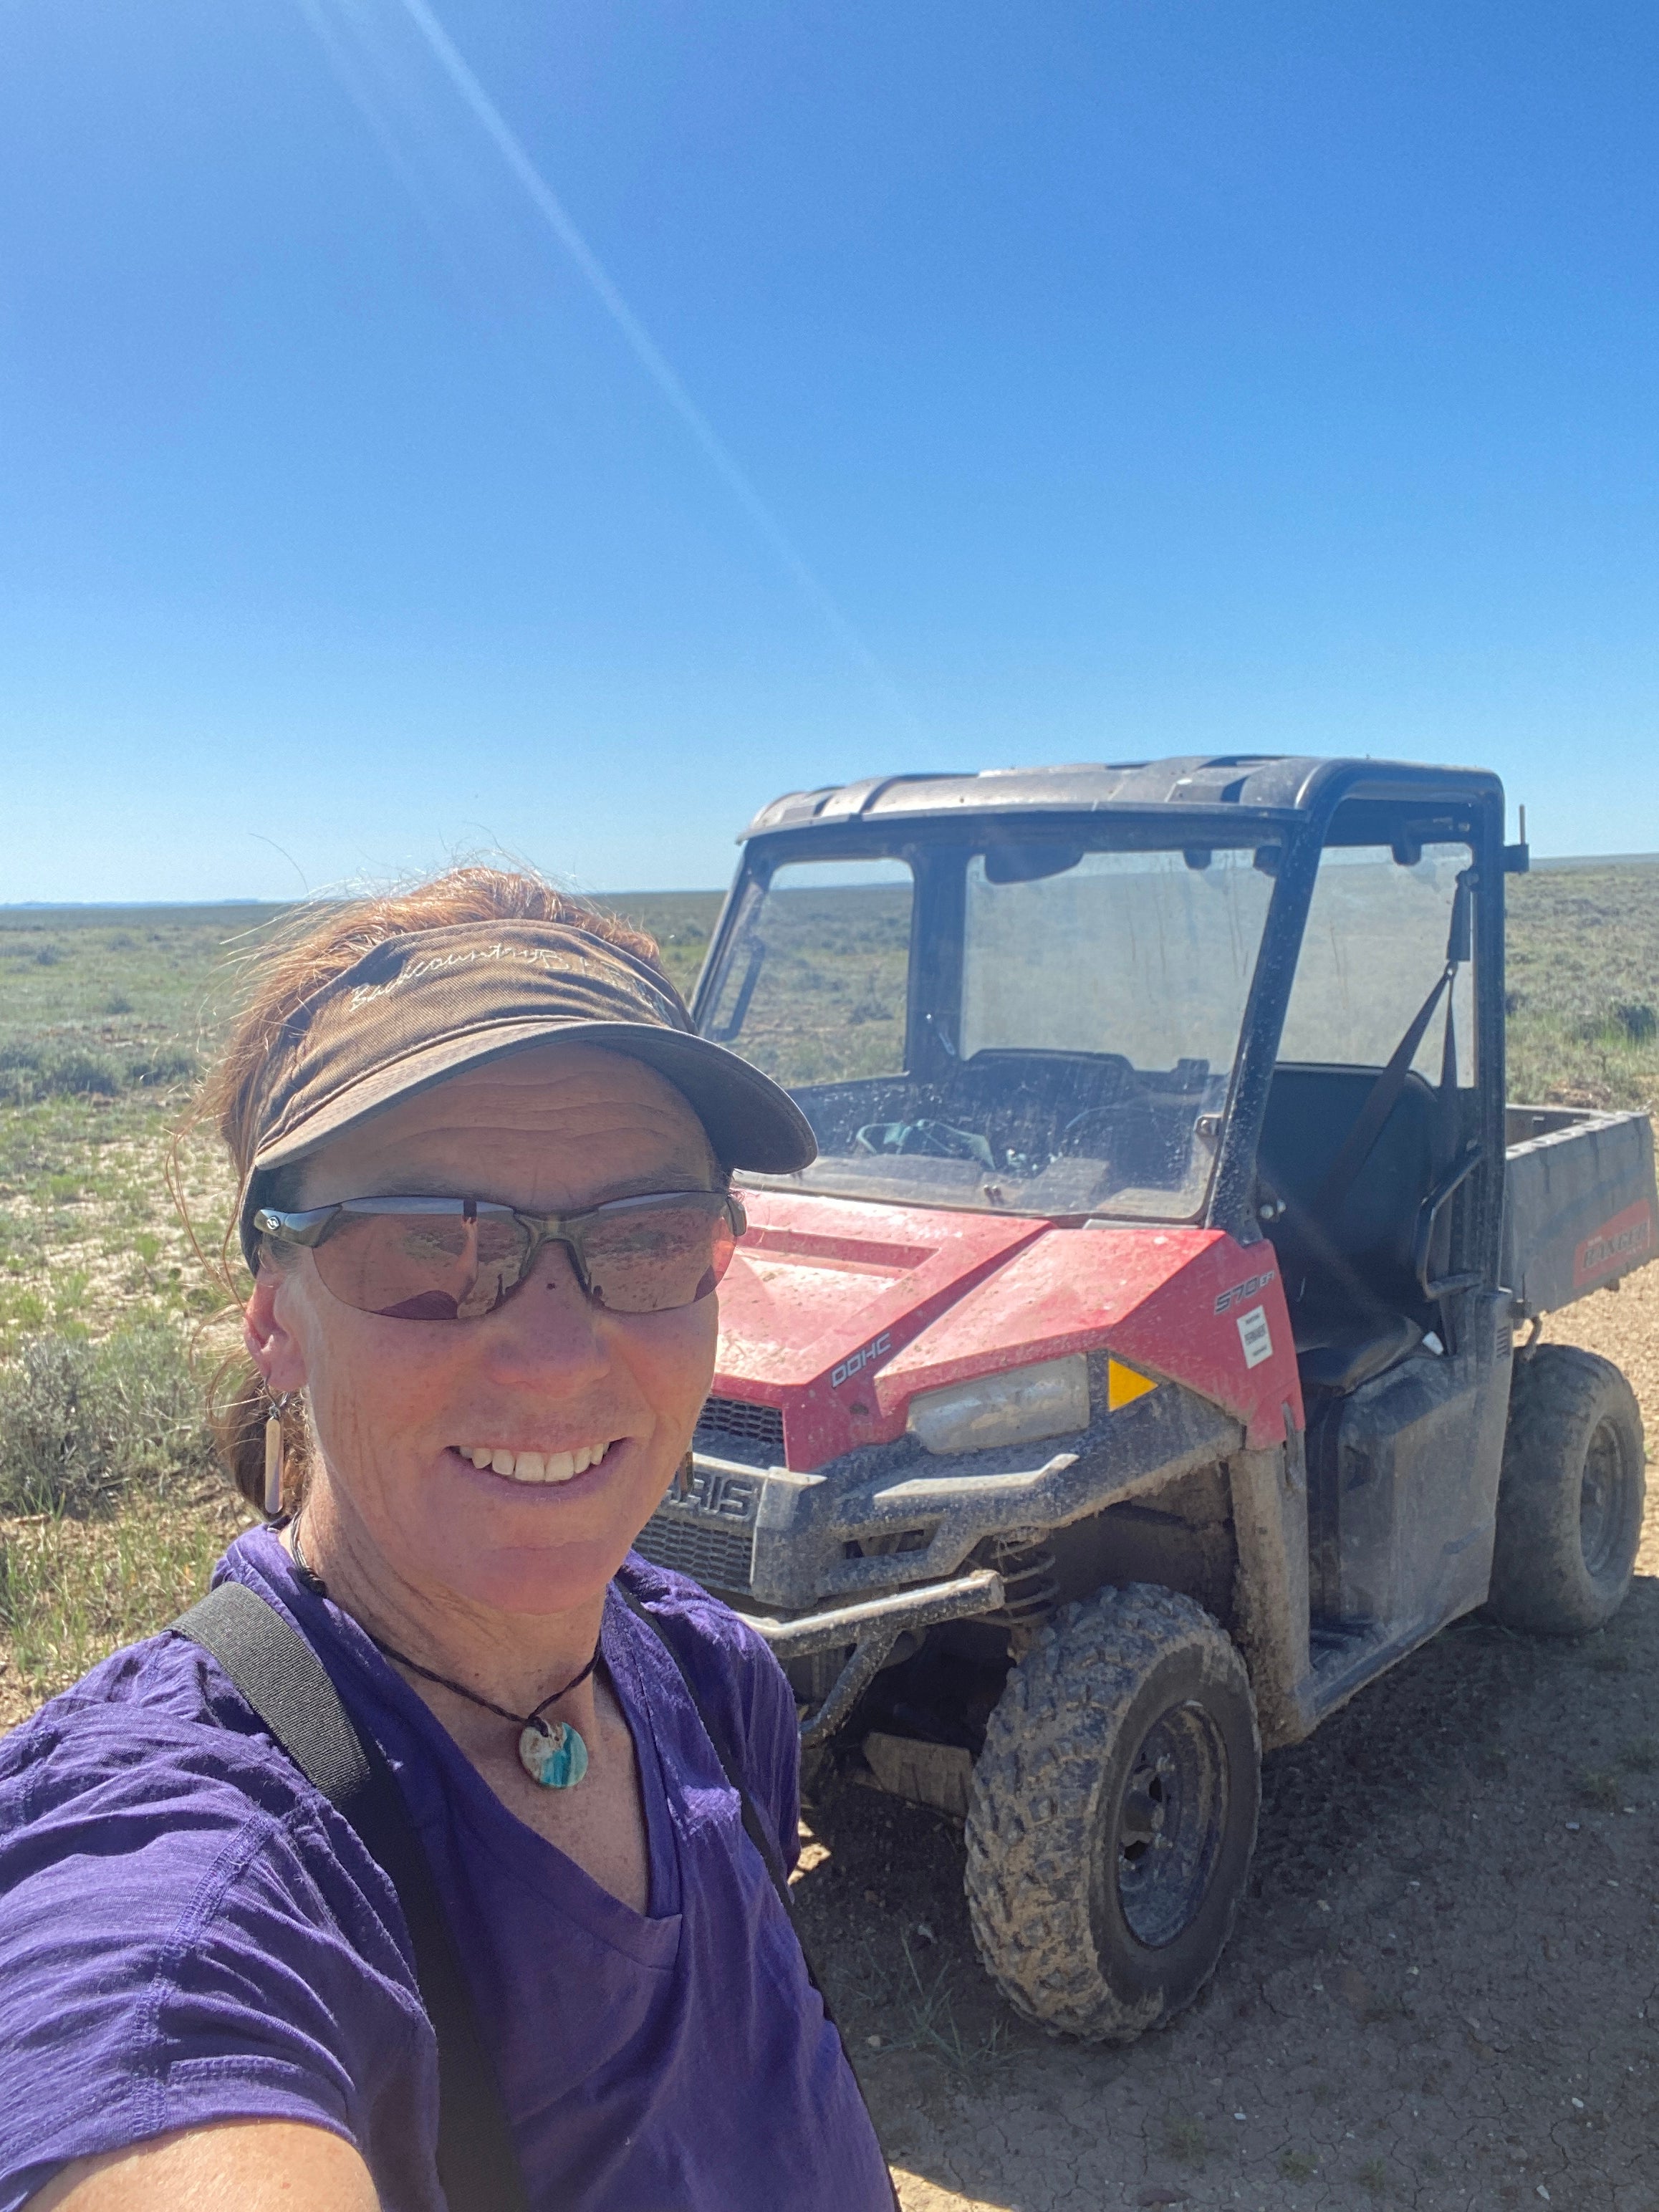 image show a biologist smiling for a selfie with a red UTV vehicle behind her